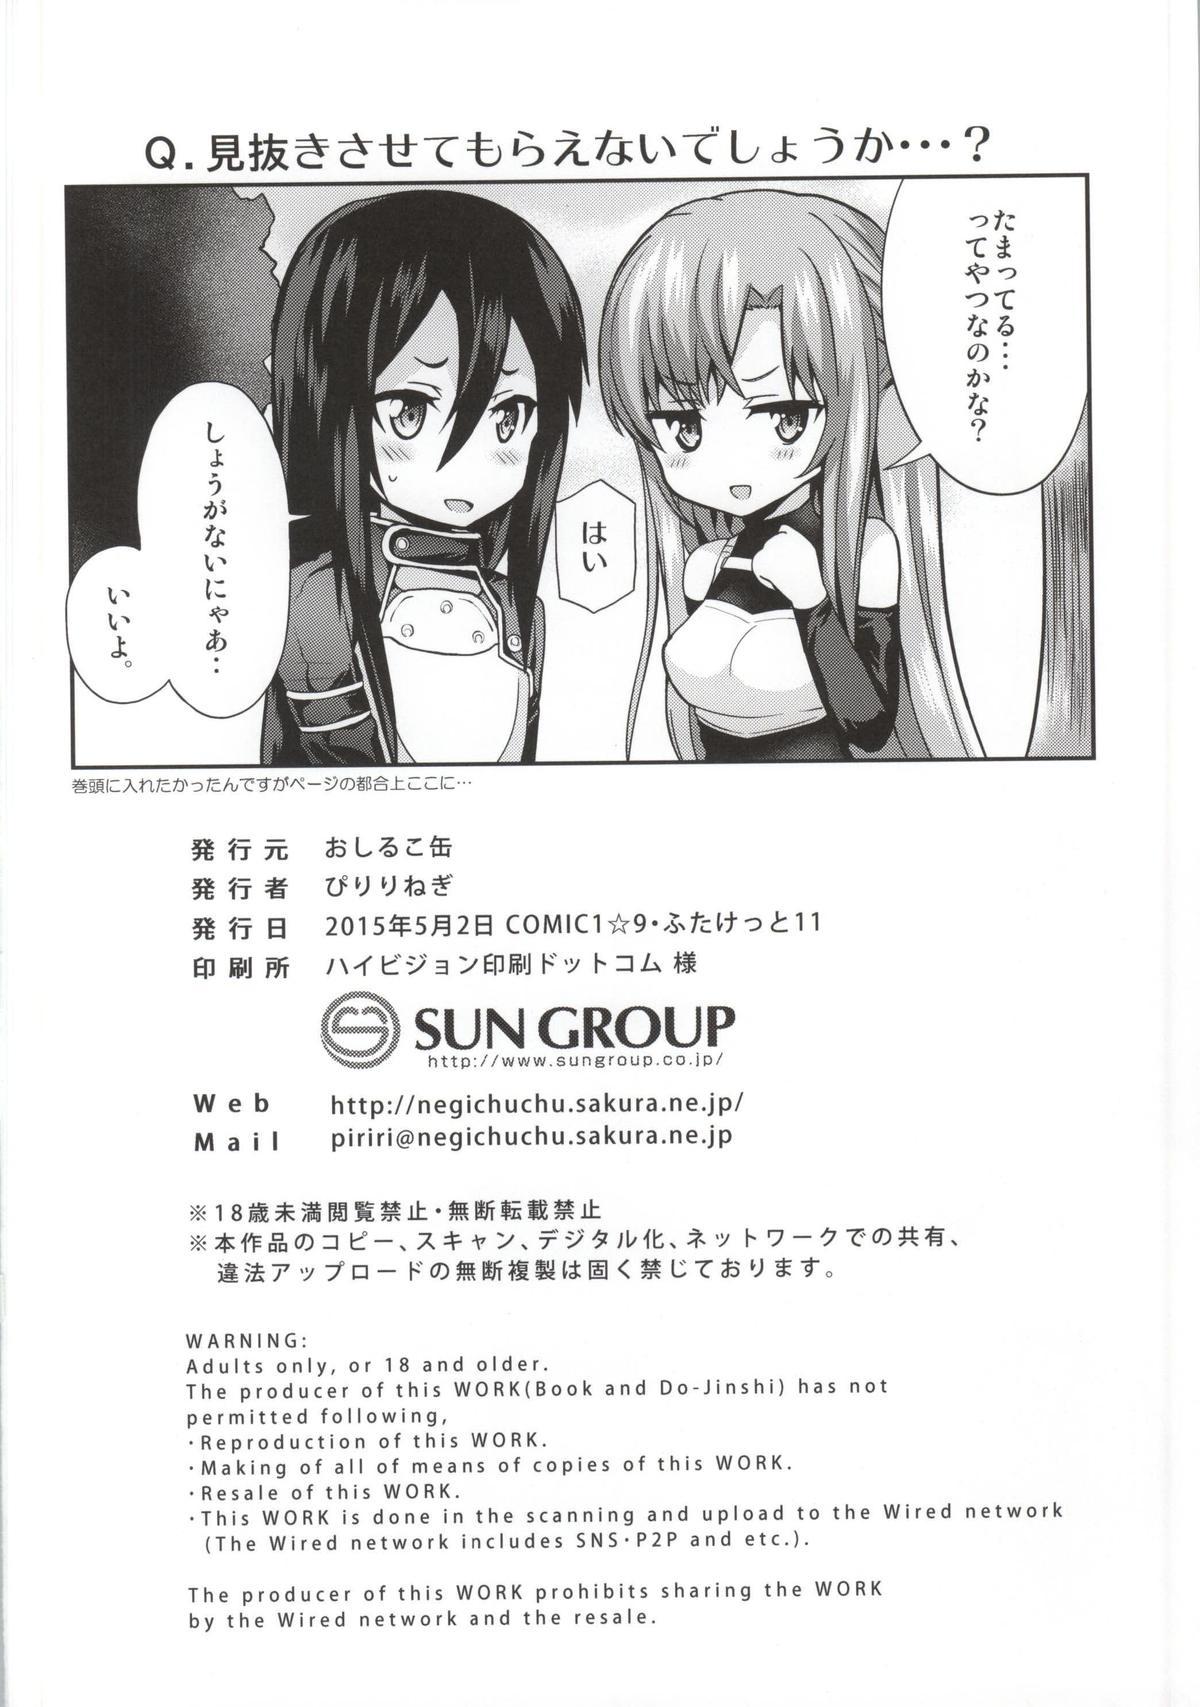 Pussylicking Sword of Asuna - Sword art online Cunnilingus - Page 20